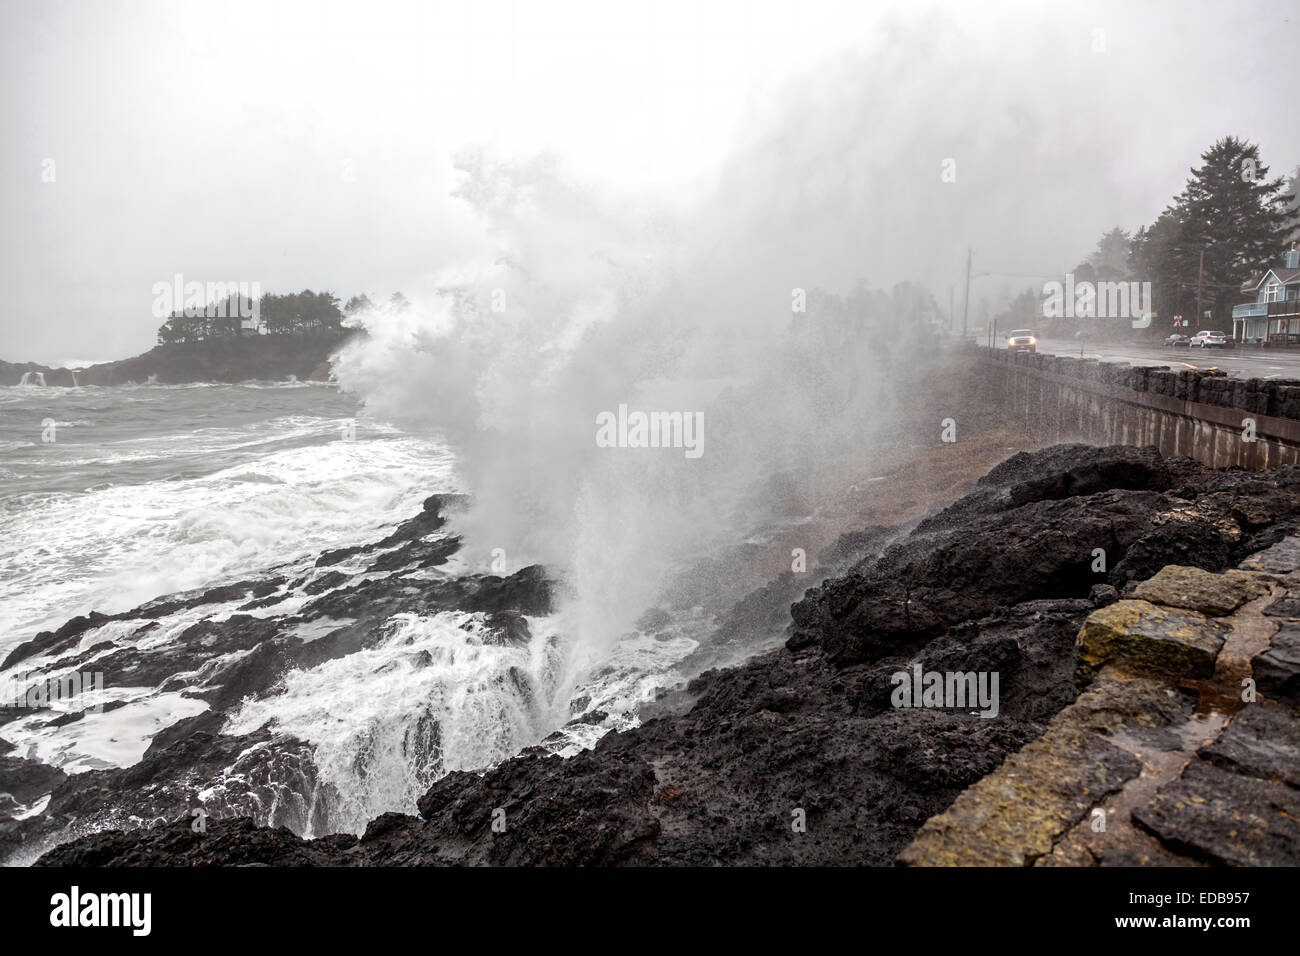 Waves crash on the rocky Pacific shoreline and seawall, washing over U.S. Route 101 and passing cars in Depoe Bay, Oregon USA. Stock Photo